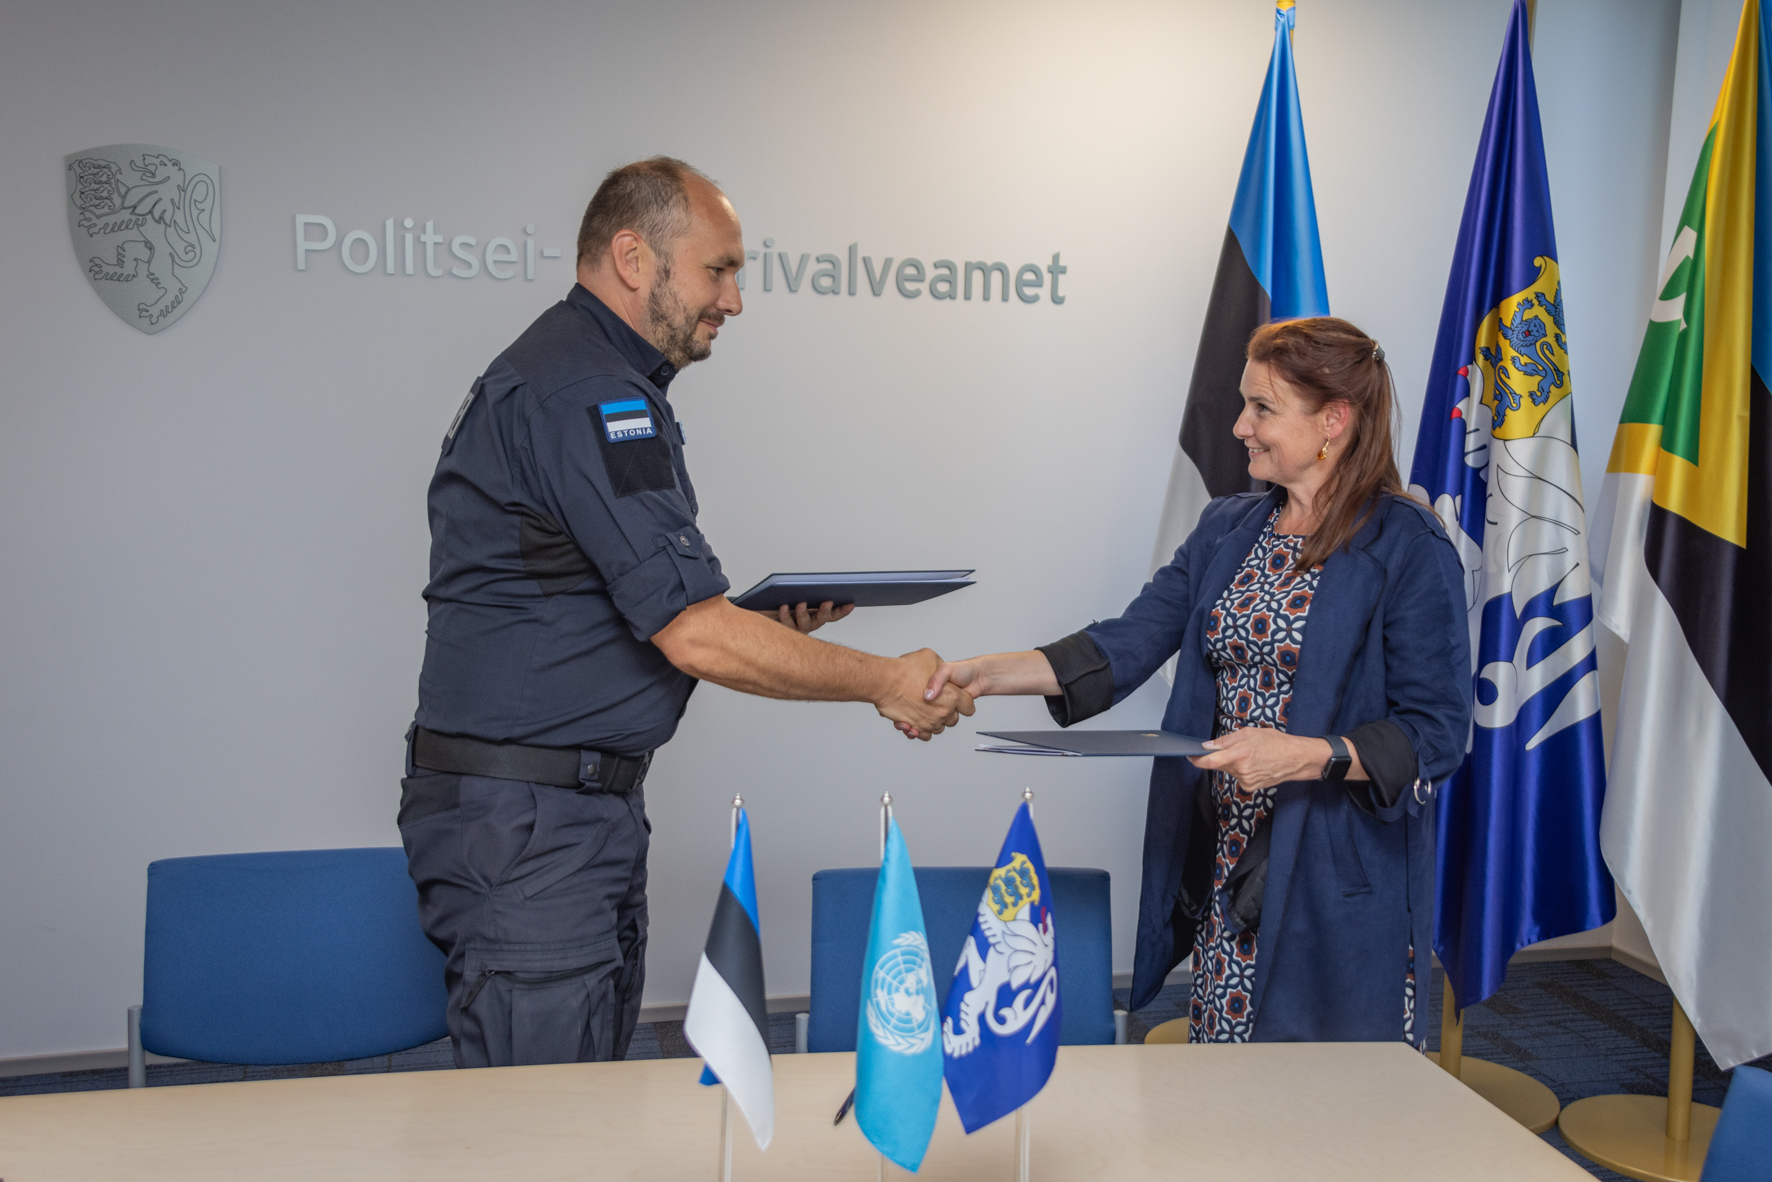 Estonian Police and Northern help Europe – Border to UNHCR with Board Guard UNHCR refugees working